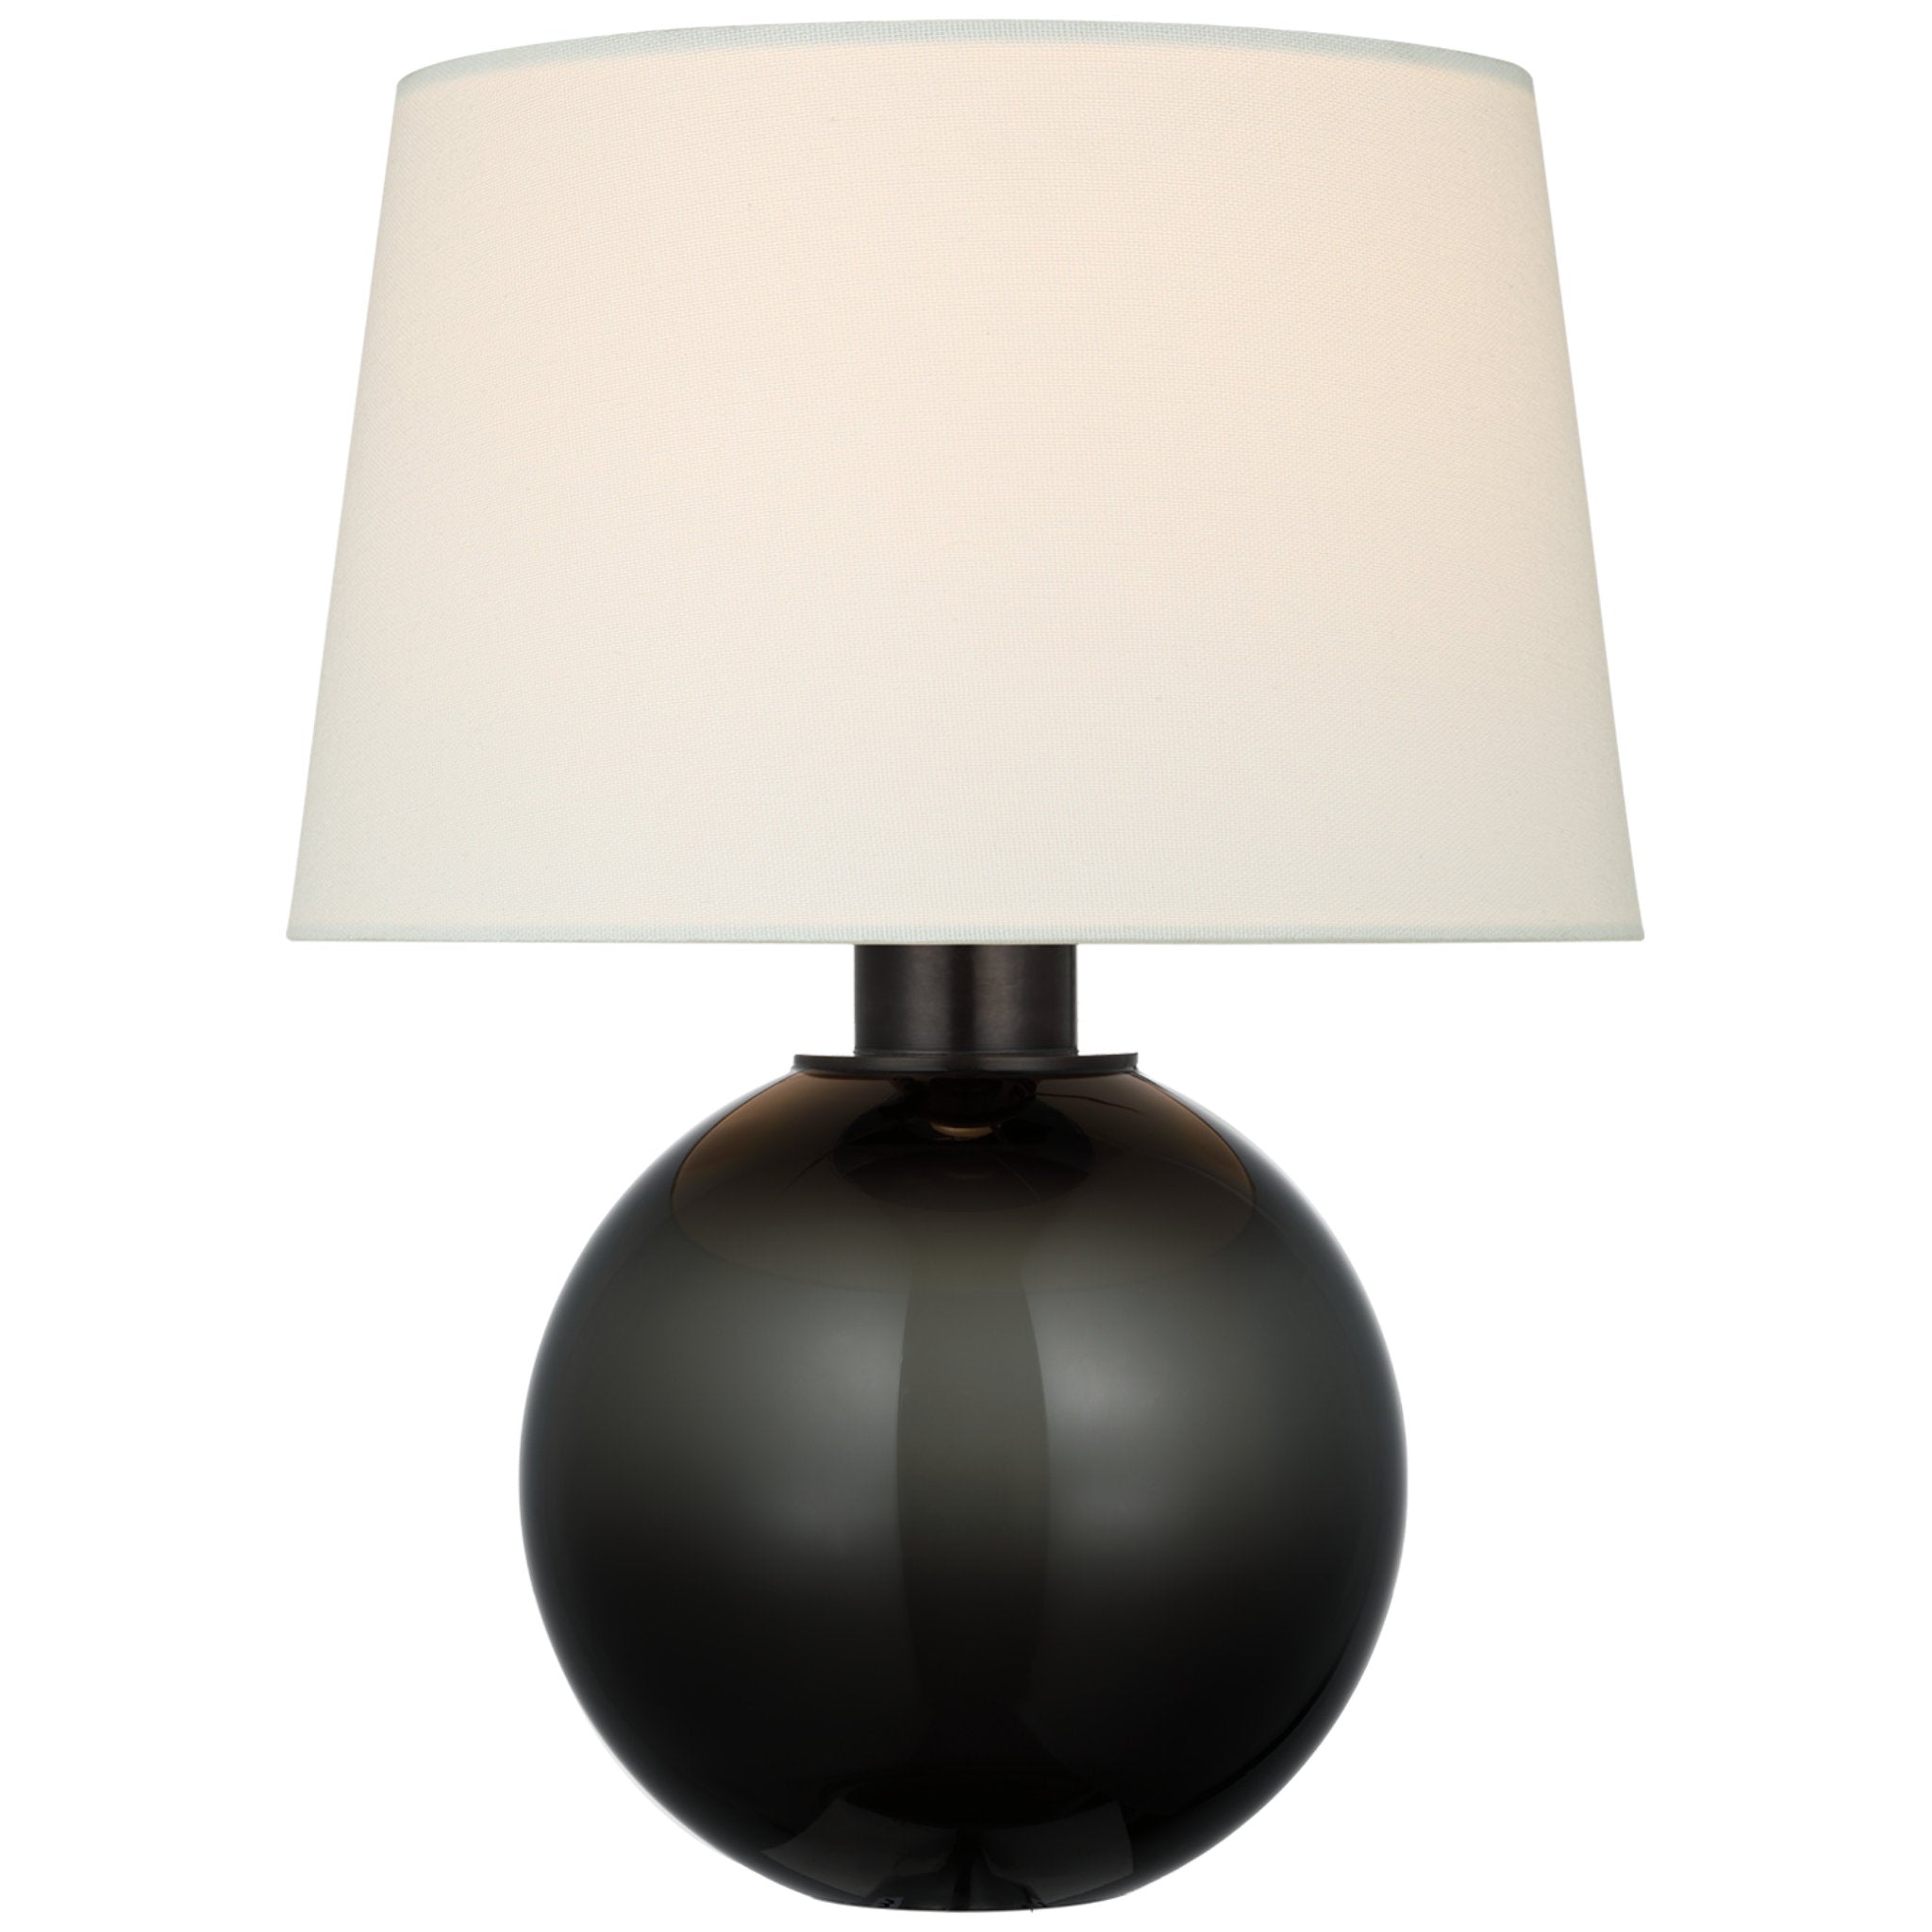 Chapman & Myers Masie Small Table Lamp in Smoked Glass with Linen Shade